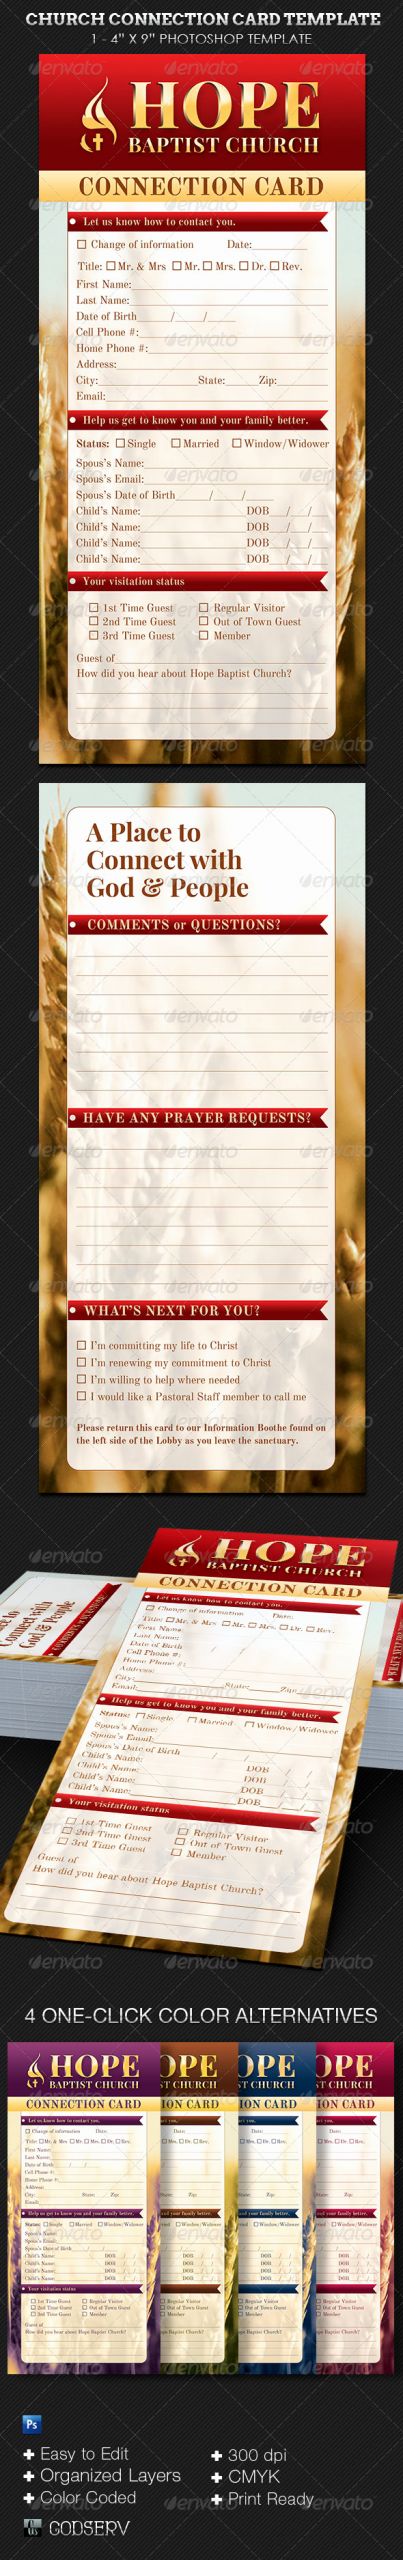 Church Visitor Card Template Generator Best Of Church Connection Card Template by Godserv